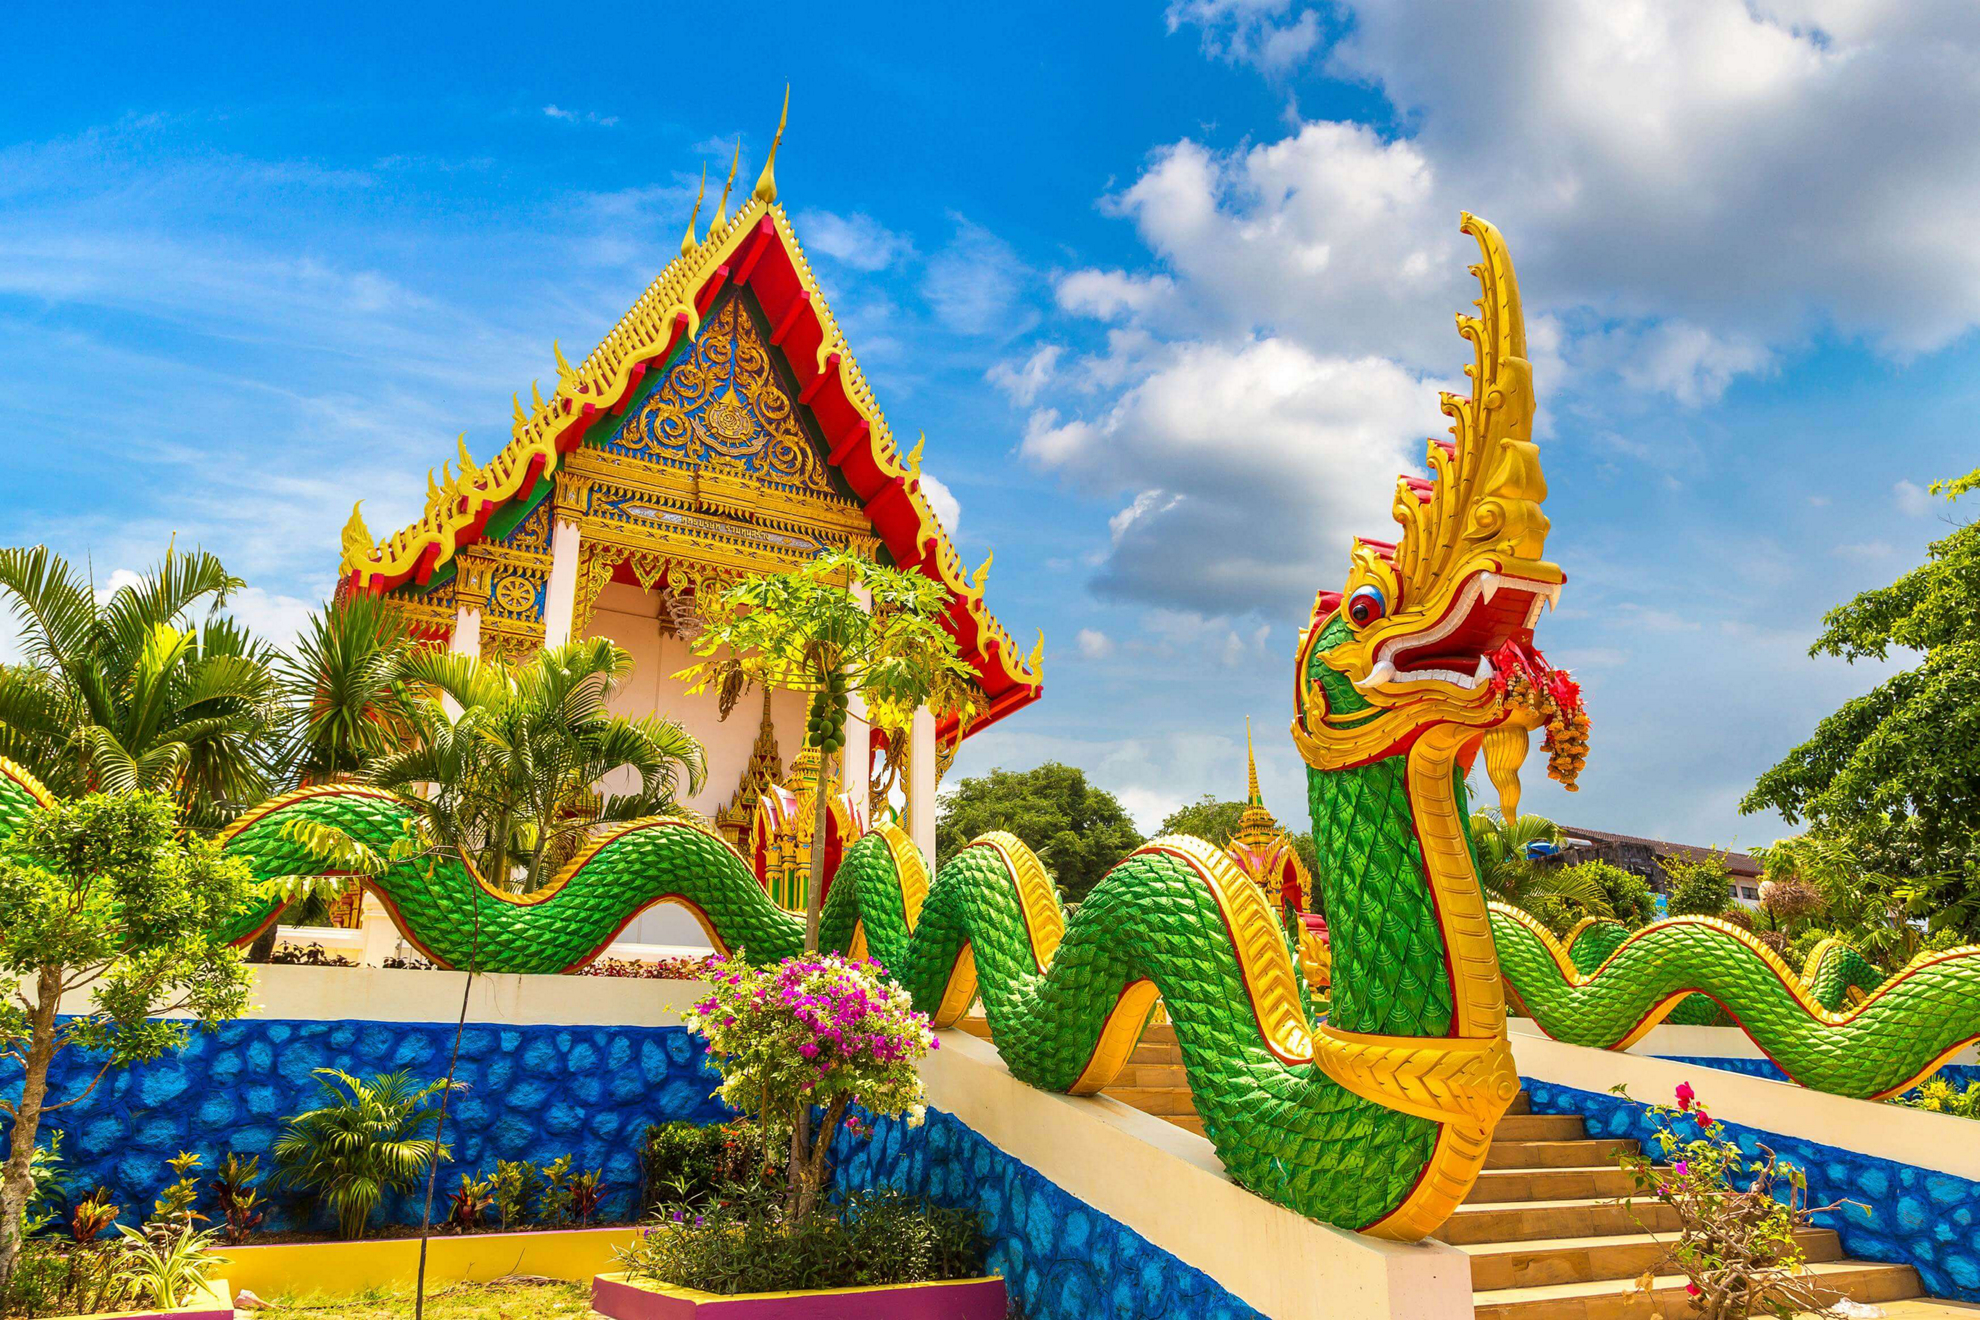 Things to do in Phuket: A traditional temple with two snake statues outside